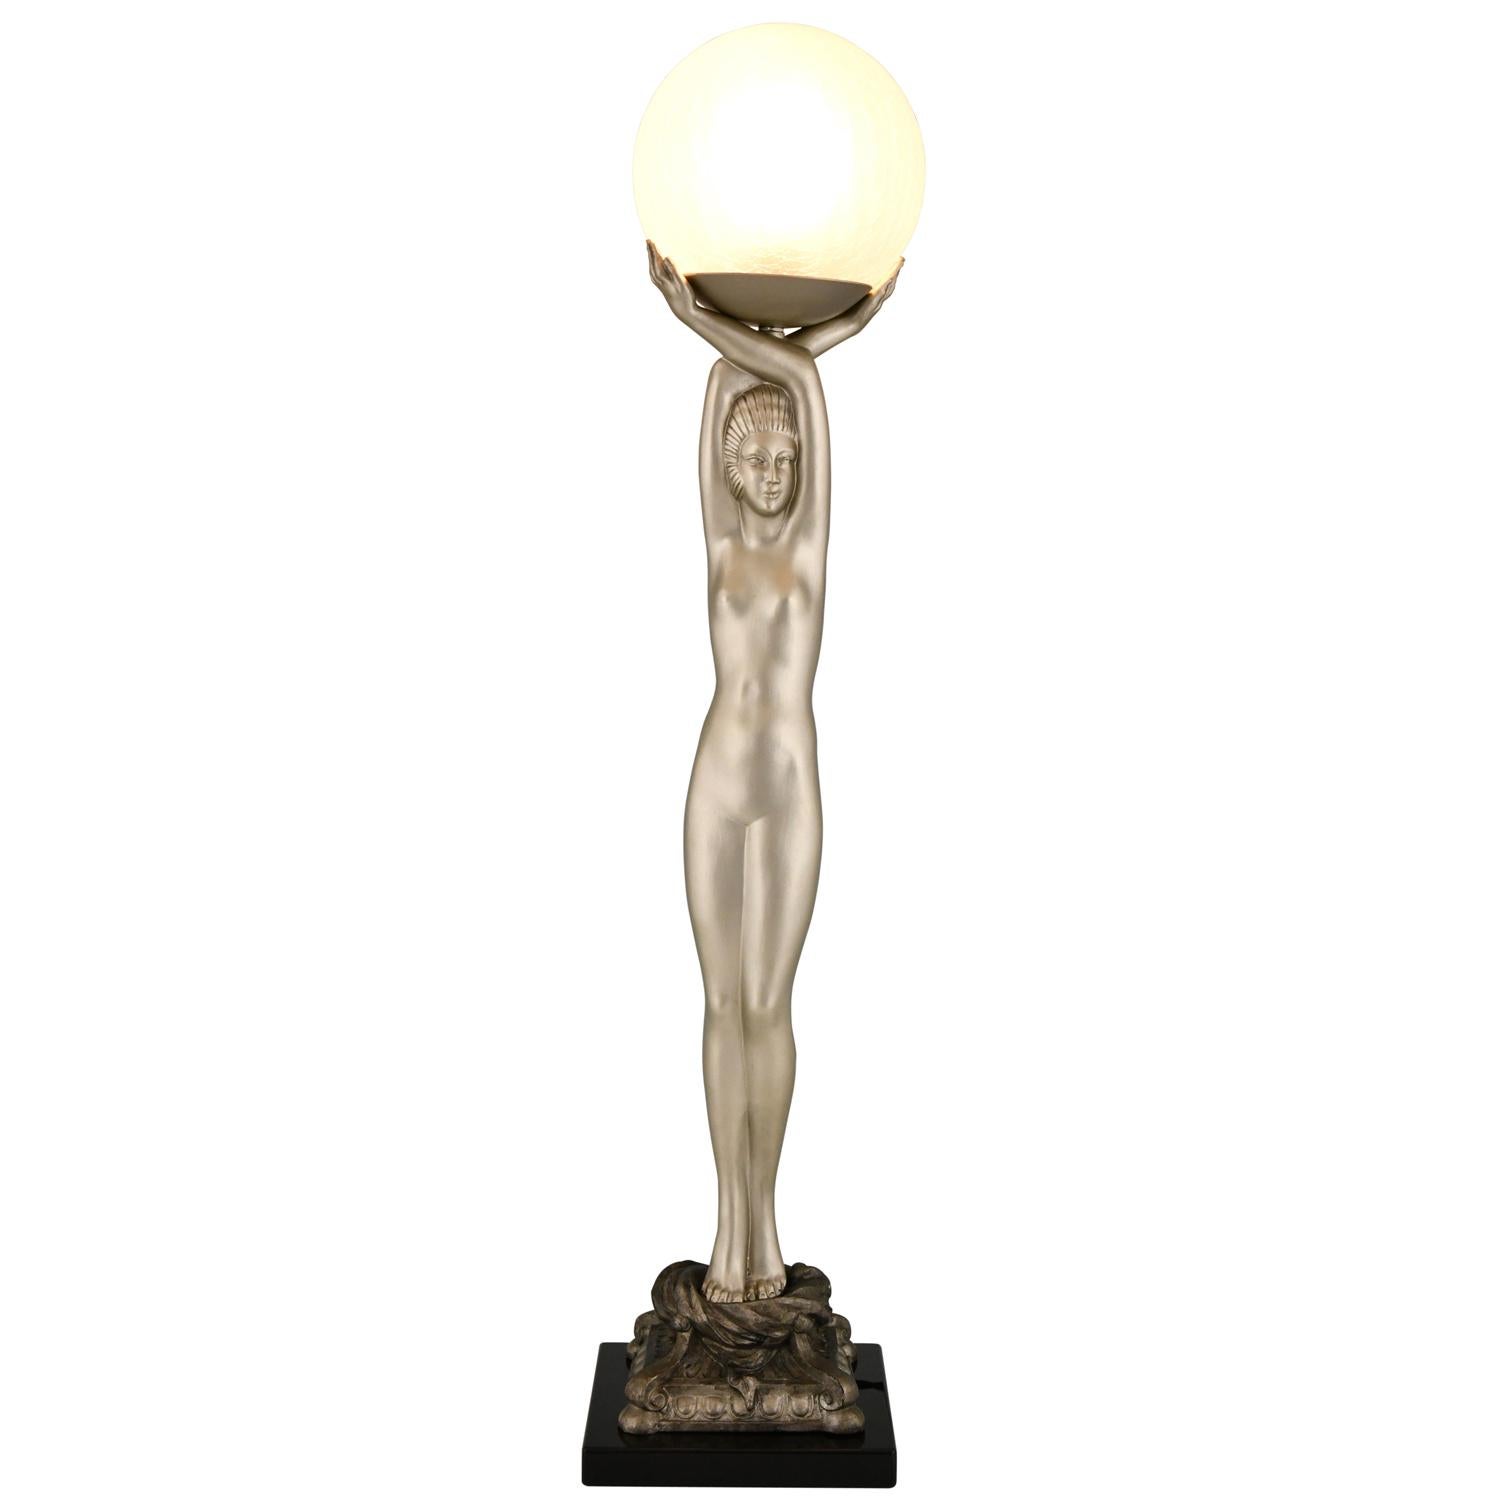 Art Deco style lamp standing nude with globe after a model by Pierre Le Faguays. Art Metal with silver patina, black marble base and glass globe. France, production period ca. 60s /70s

Literature:
“Art Deco sculpture” by Victor Arwas, Academy.